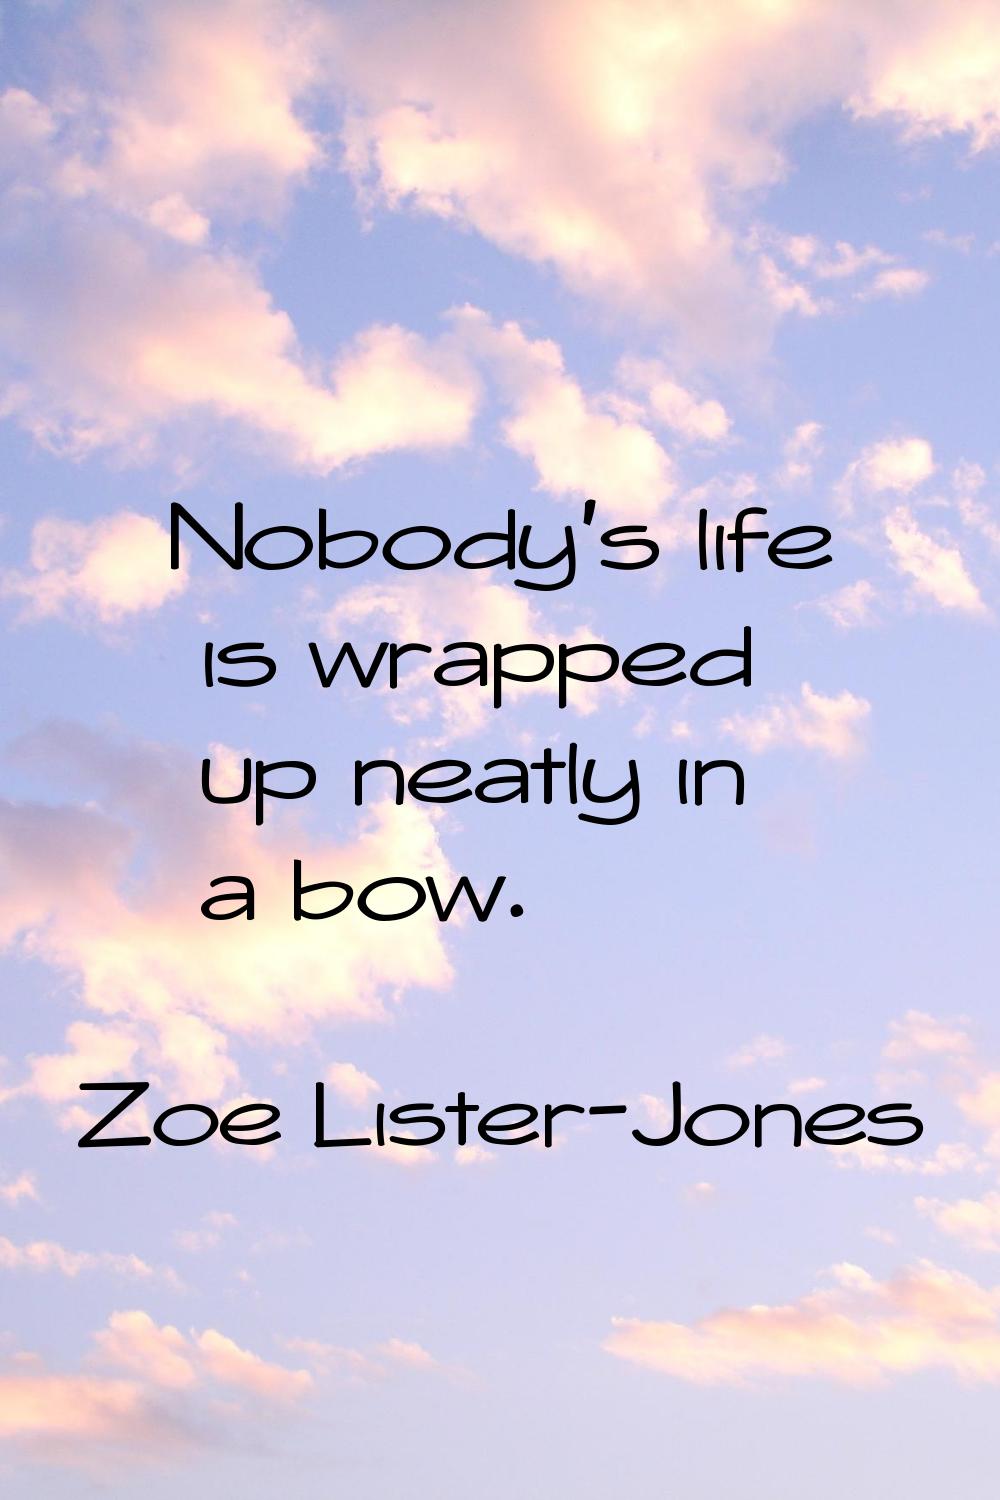 Nobody's life is wrapped up neatly in a bow.